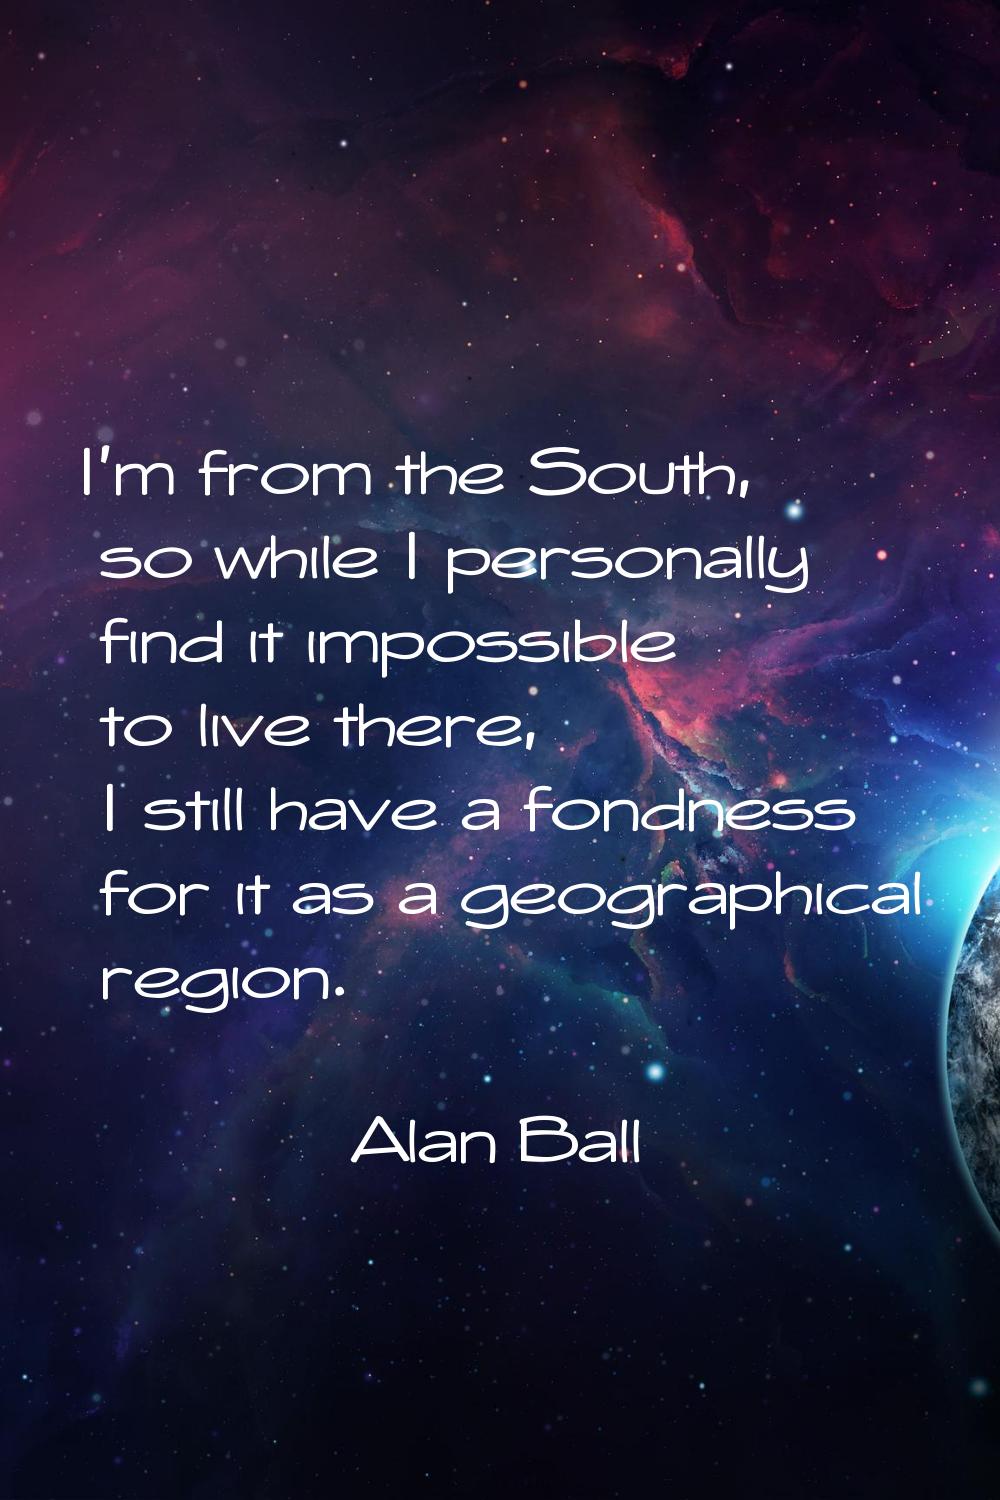 I'm from the South, so while I personally find it impossible to live there, I still have a fondness